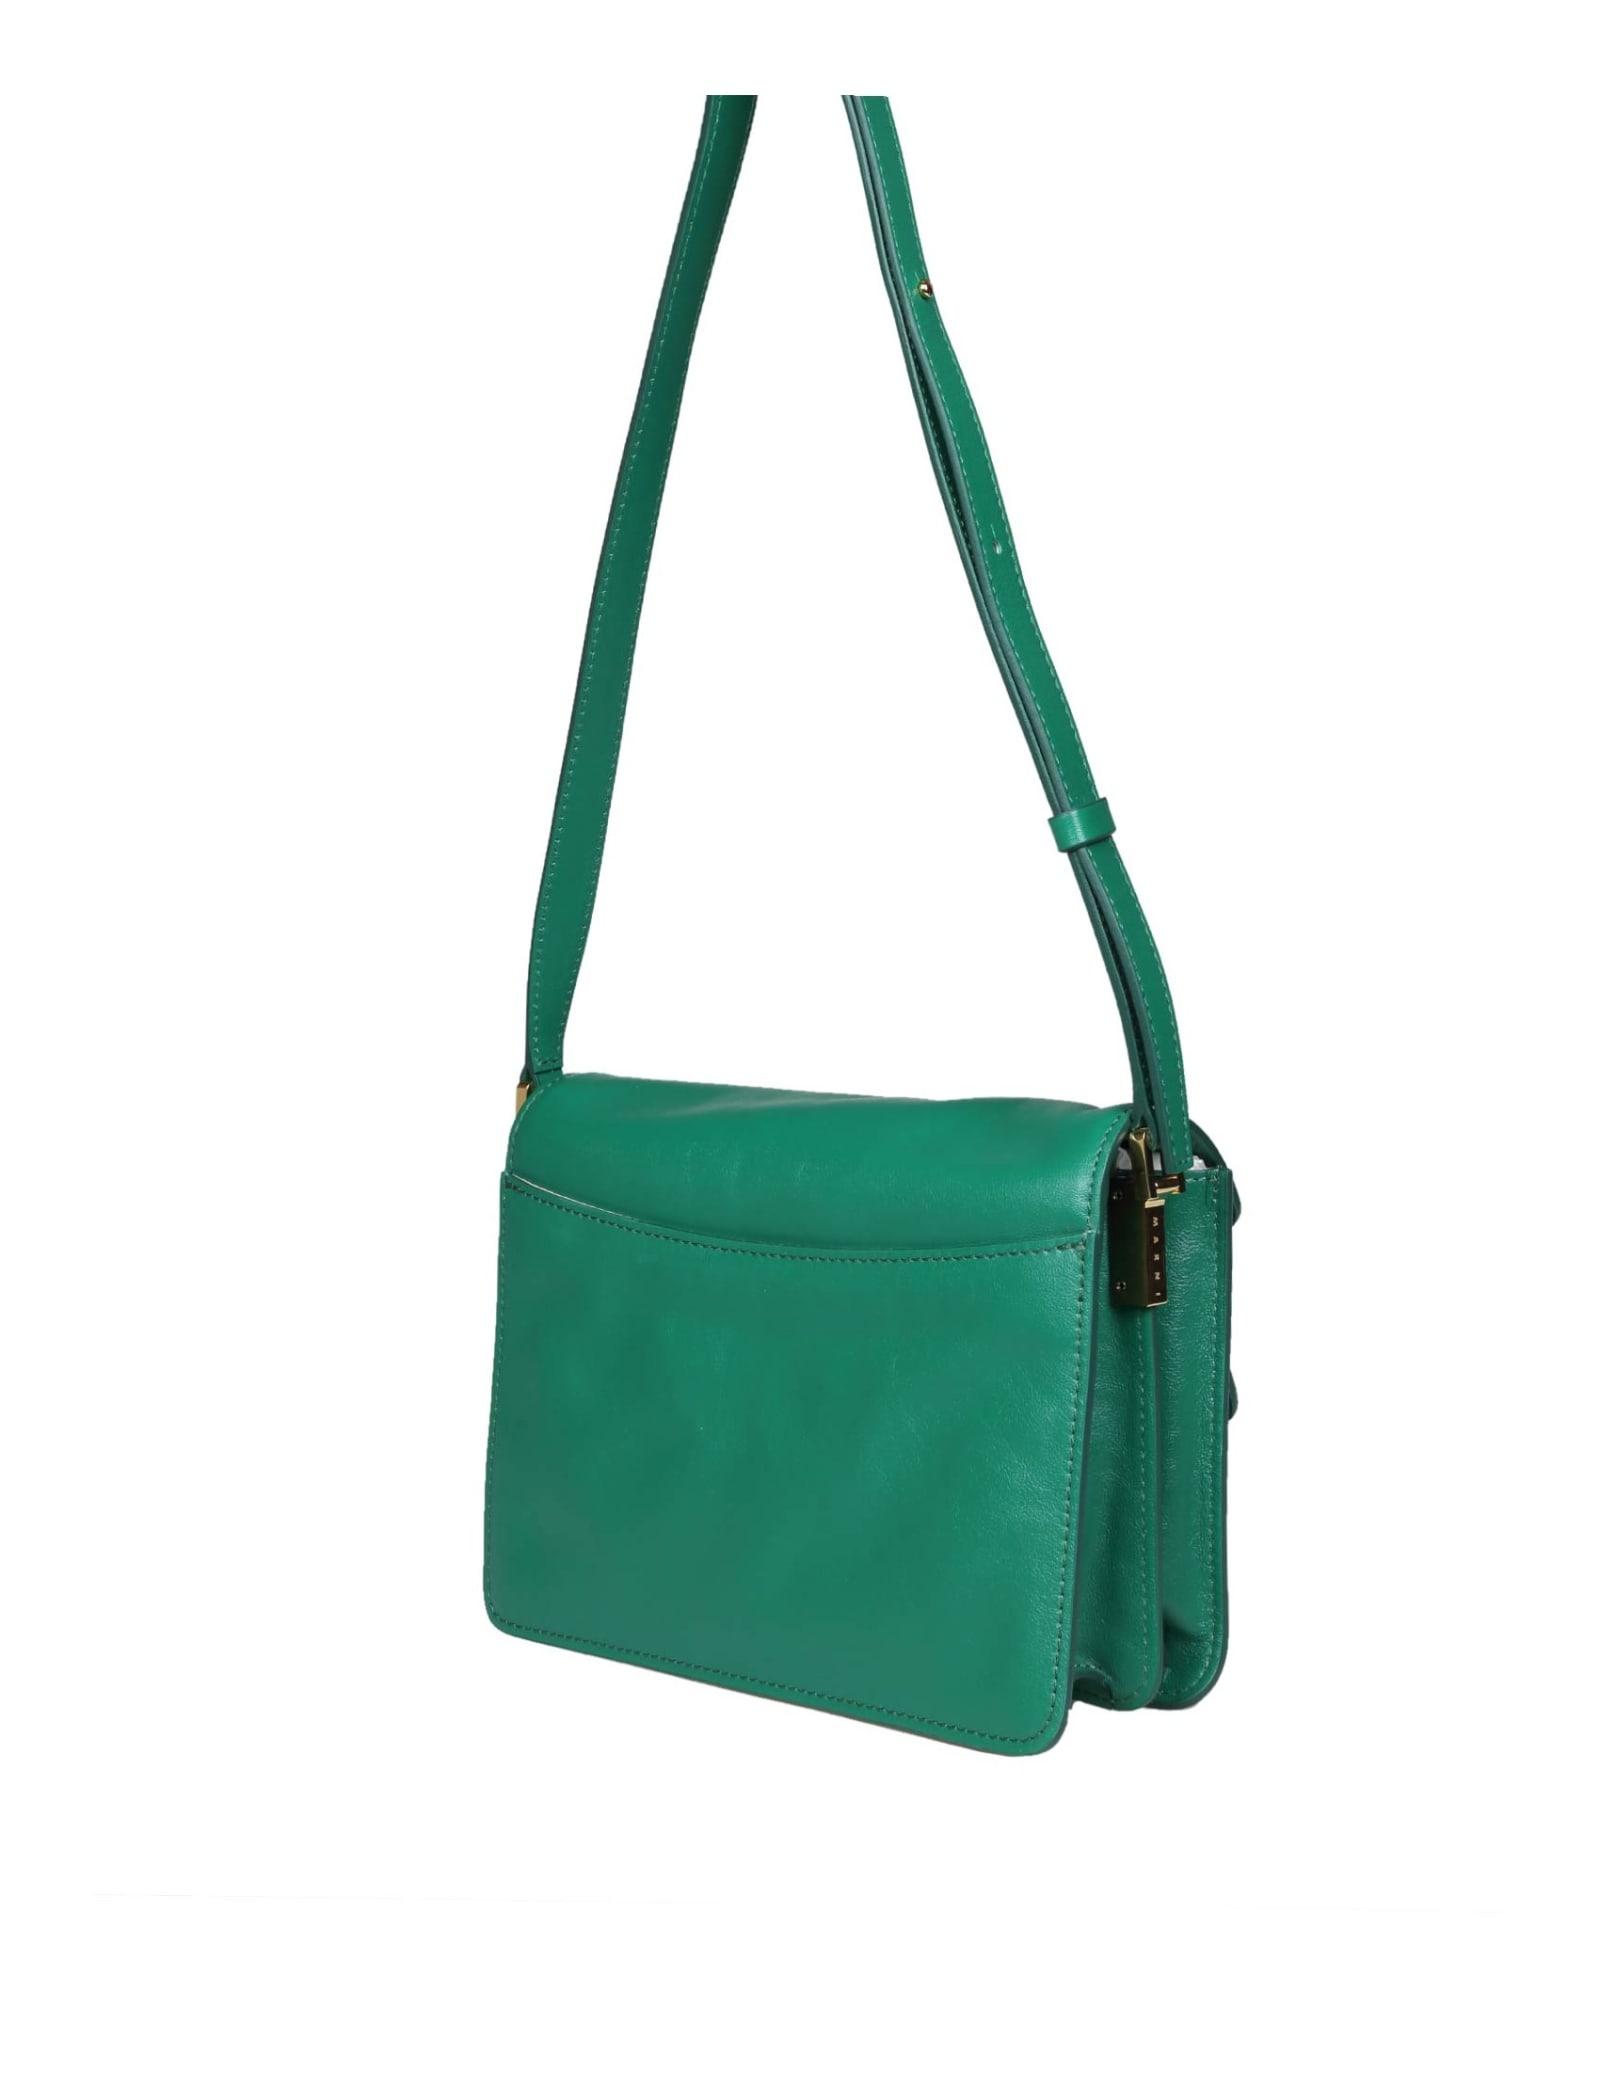 TRUNK SOFT mini bag in green and burgundy leather